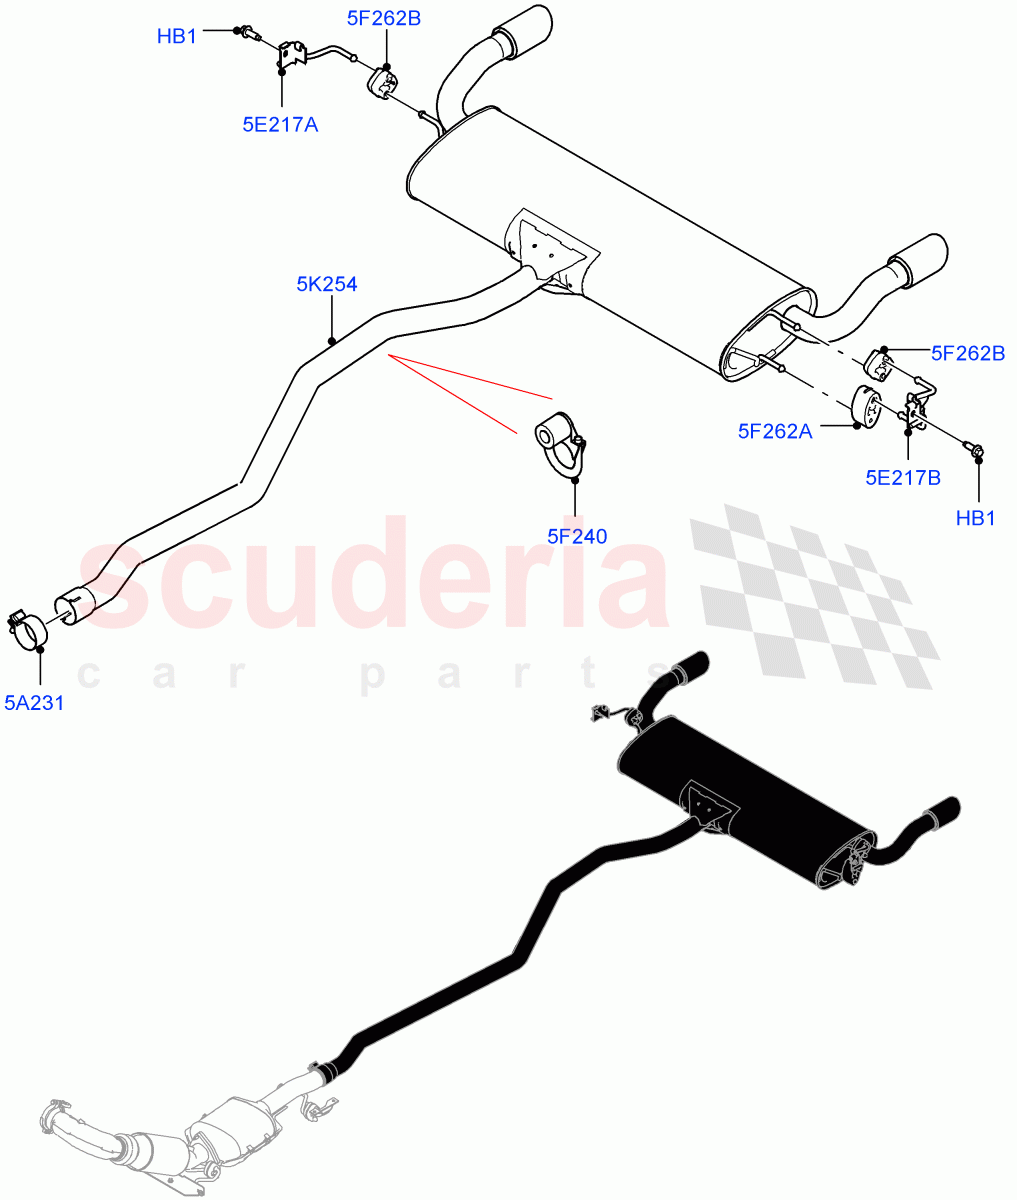 Rear Exhaust System(2.2L CR DI 16V Diesel,With 7 Seat Configuration,Less Spare Wheel) of Land Rover Land Rover Discovery Sport (2015+) [2.2 Single Turbo Diesel]